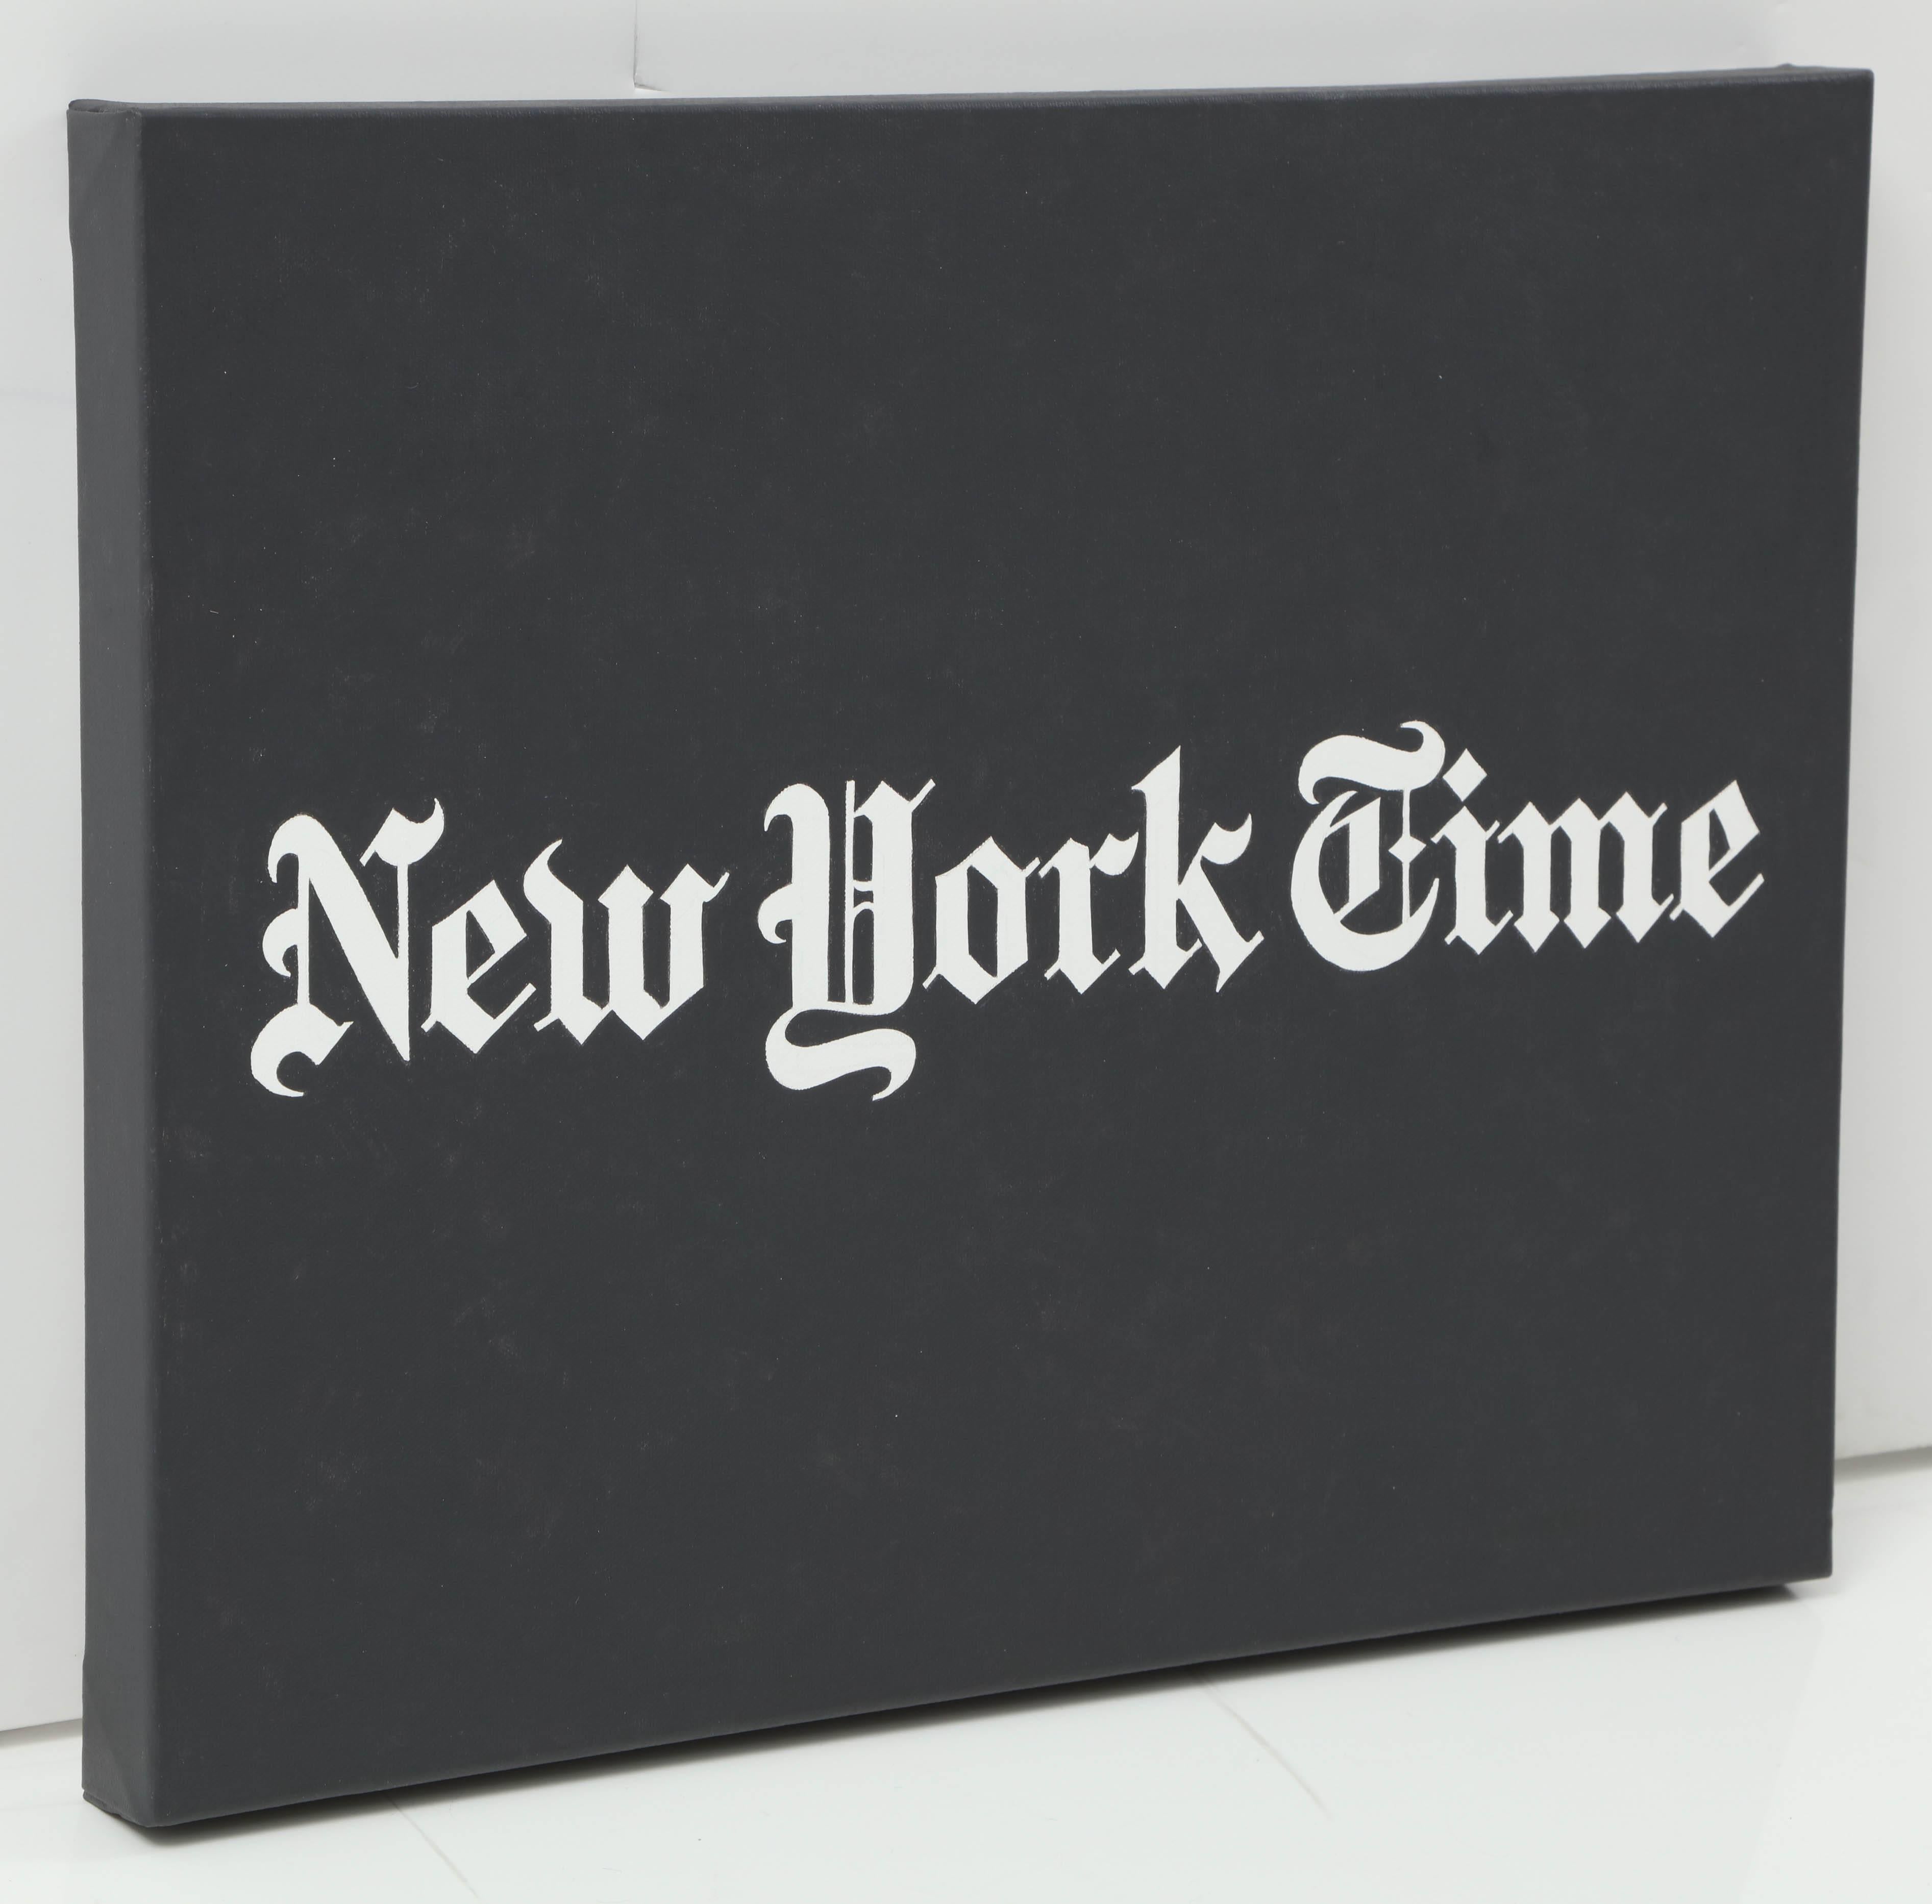 Contemporary artist Peter Buchman's "New York Time, No. 2" acrylic paint on canvas painting was made in 2016. Buchman acts as both Poet and Provocateur when he uses iconic type in his work while examining American culture. The artist finds